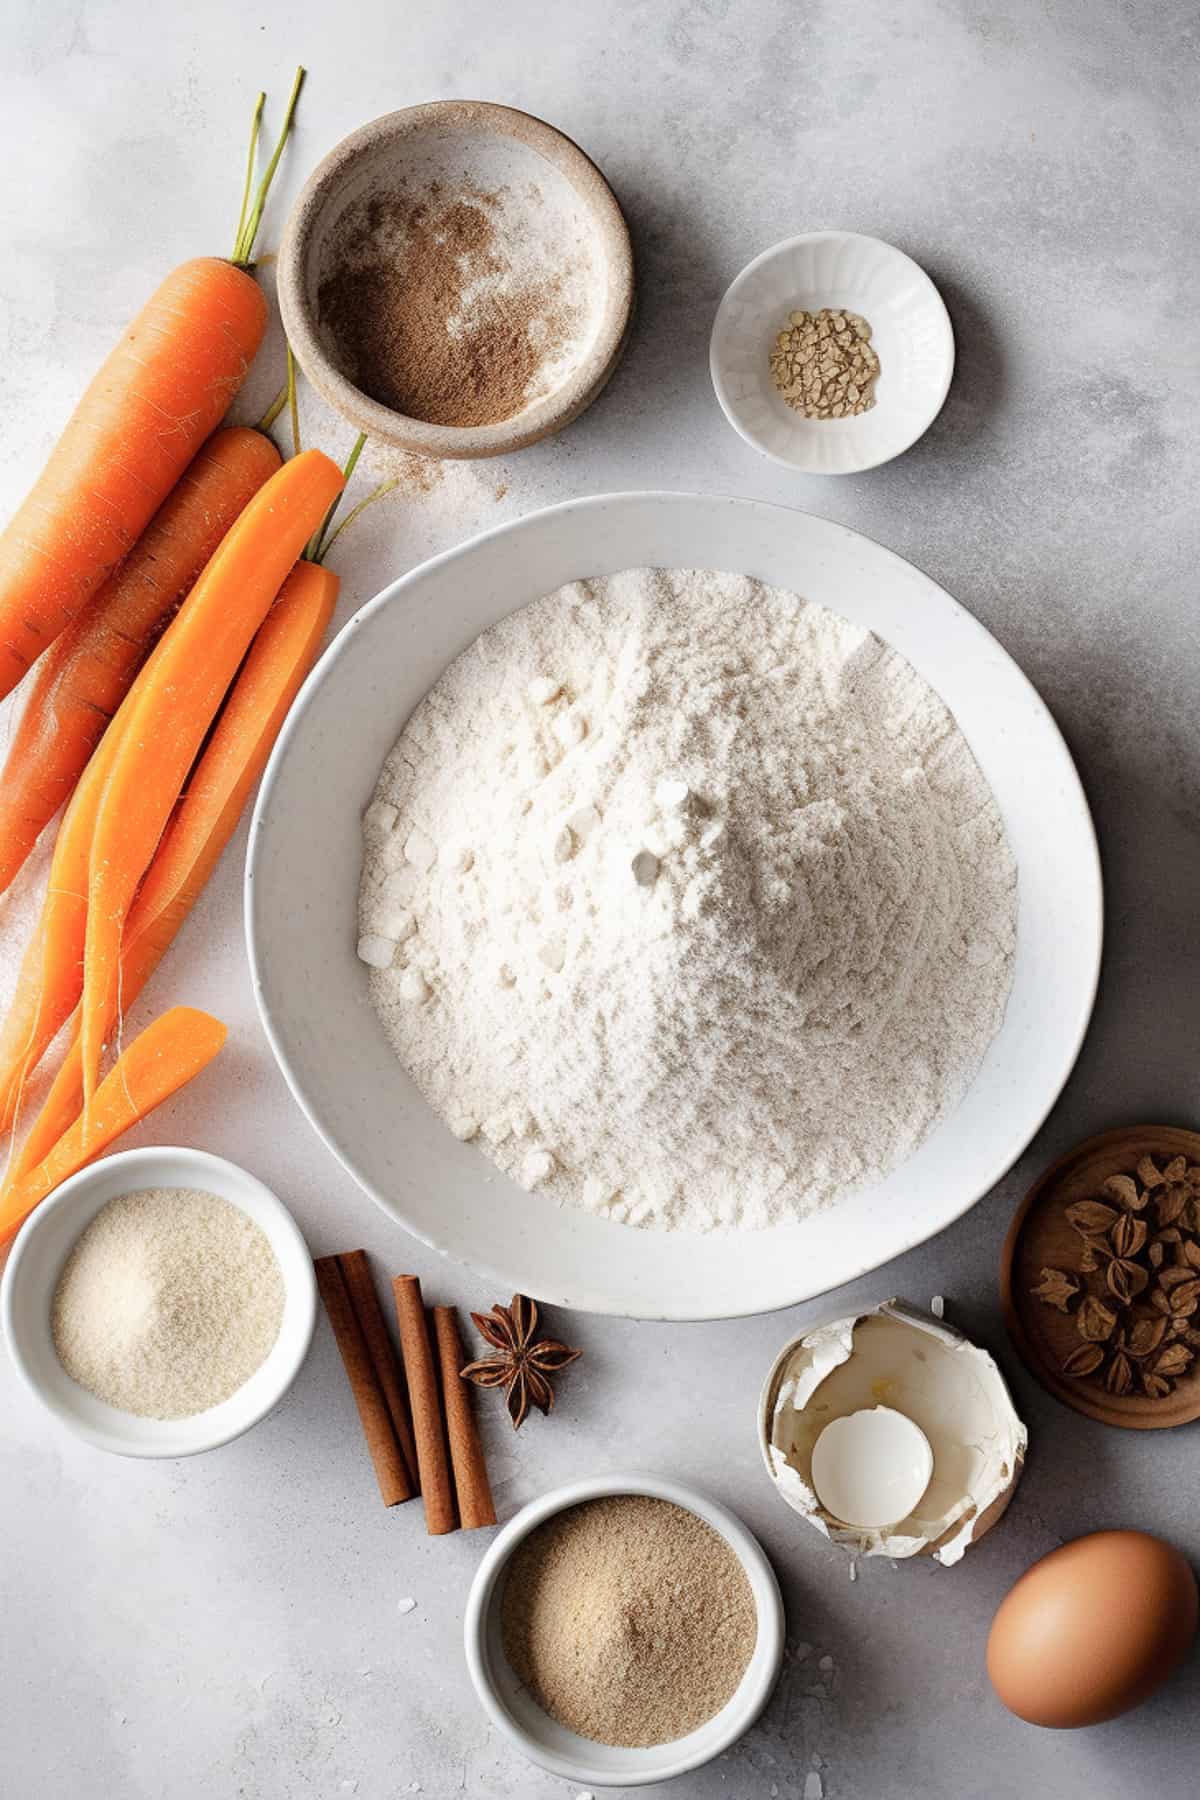 Ingredients for carrot cake on a grey table.